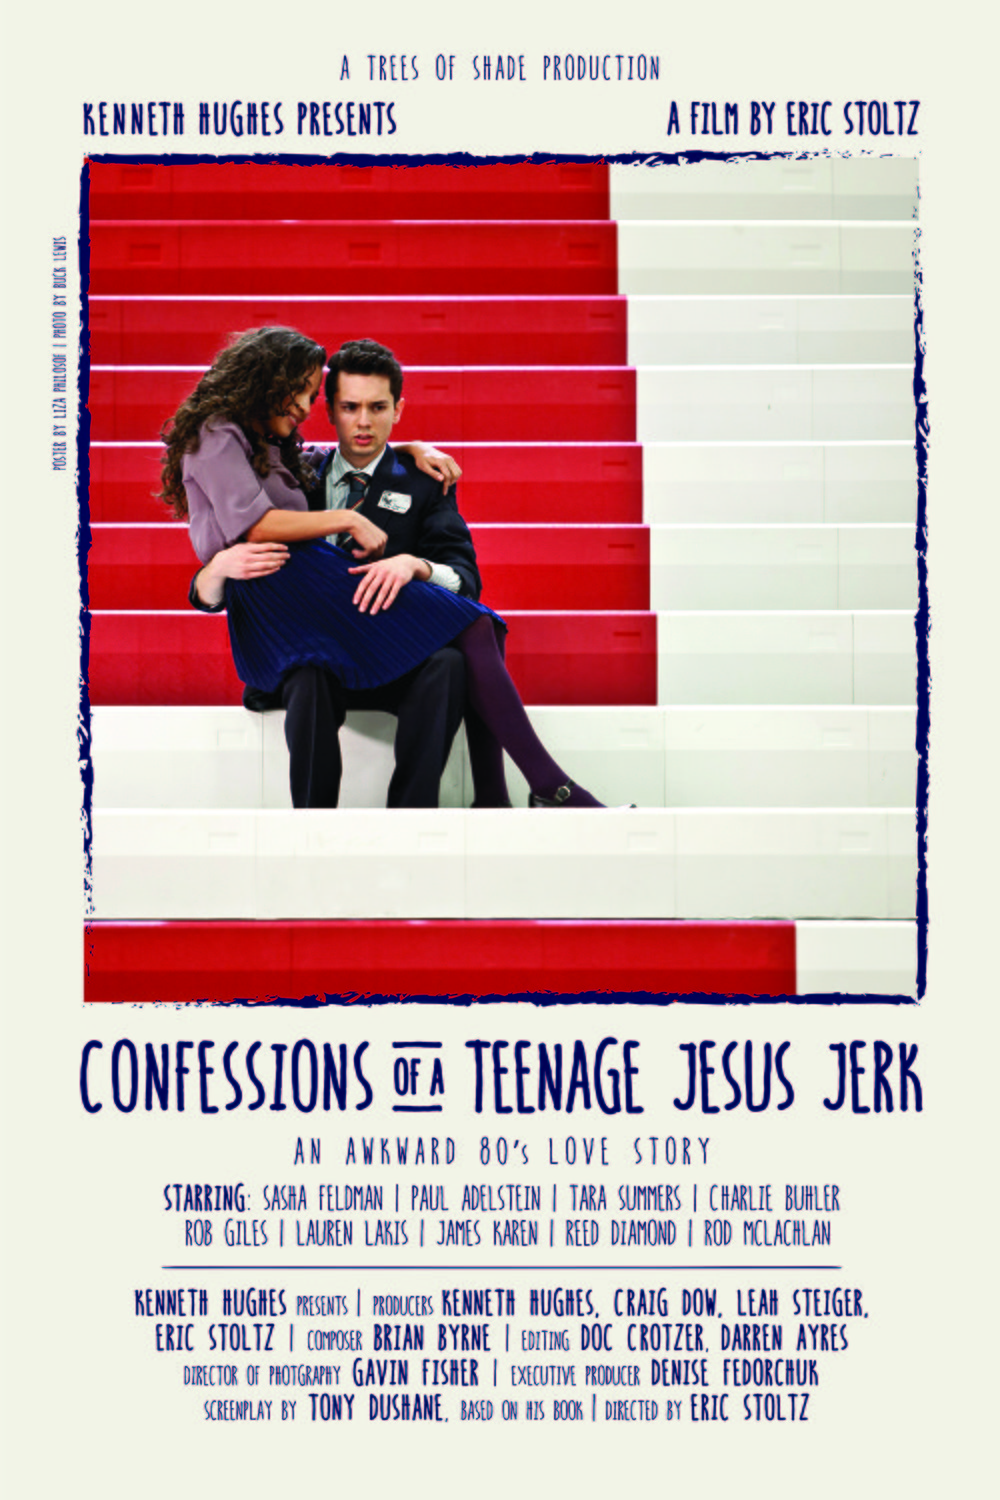 Poster of the movie Confessions of a Teenage Jesus Jerk